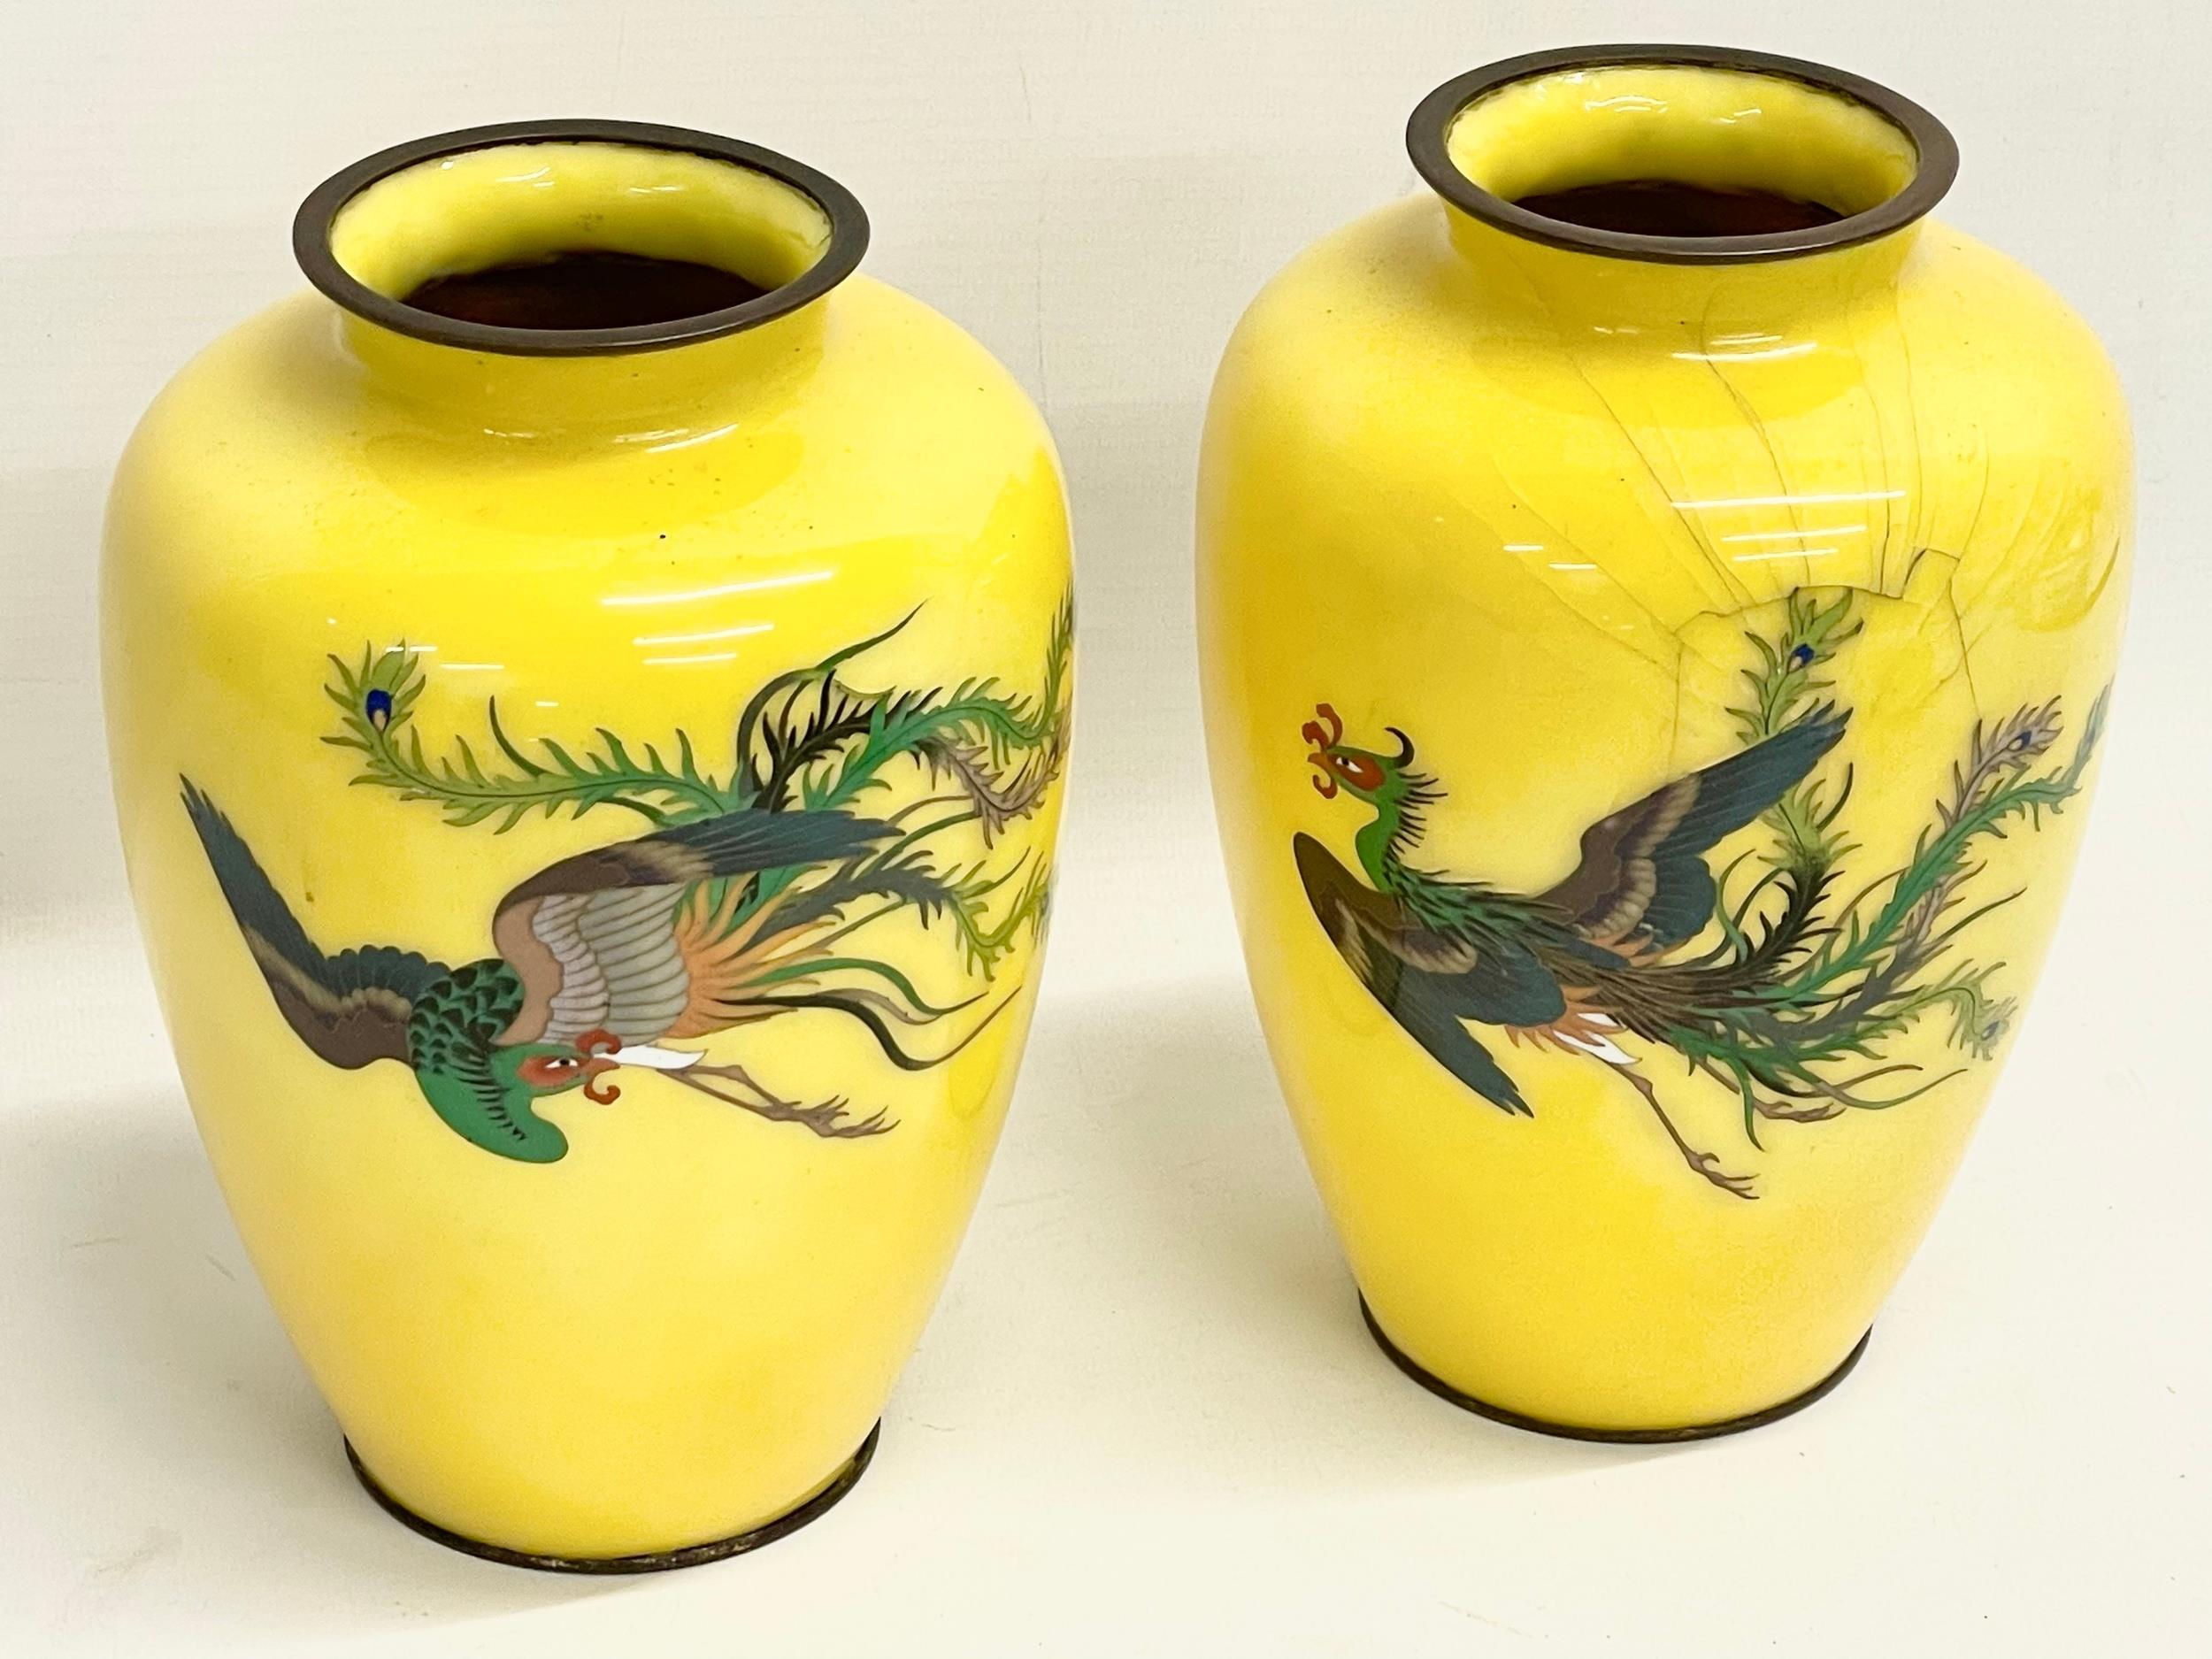 A pair of good quality late 19th century Japanese wireless Cloisonné yellow enamel vases. 13x19cm - Image 2 of 4